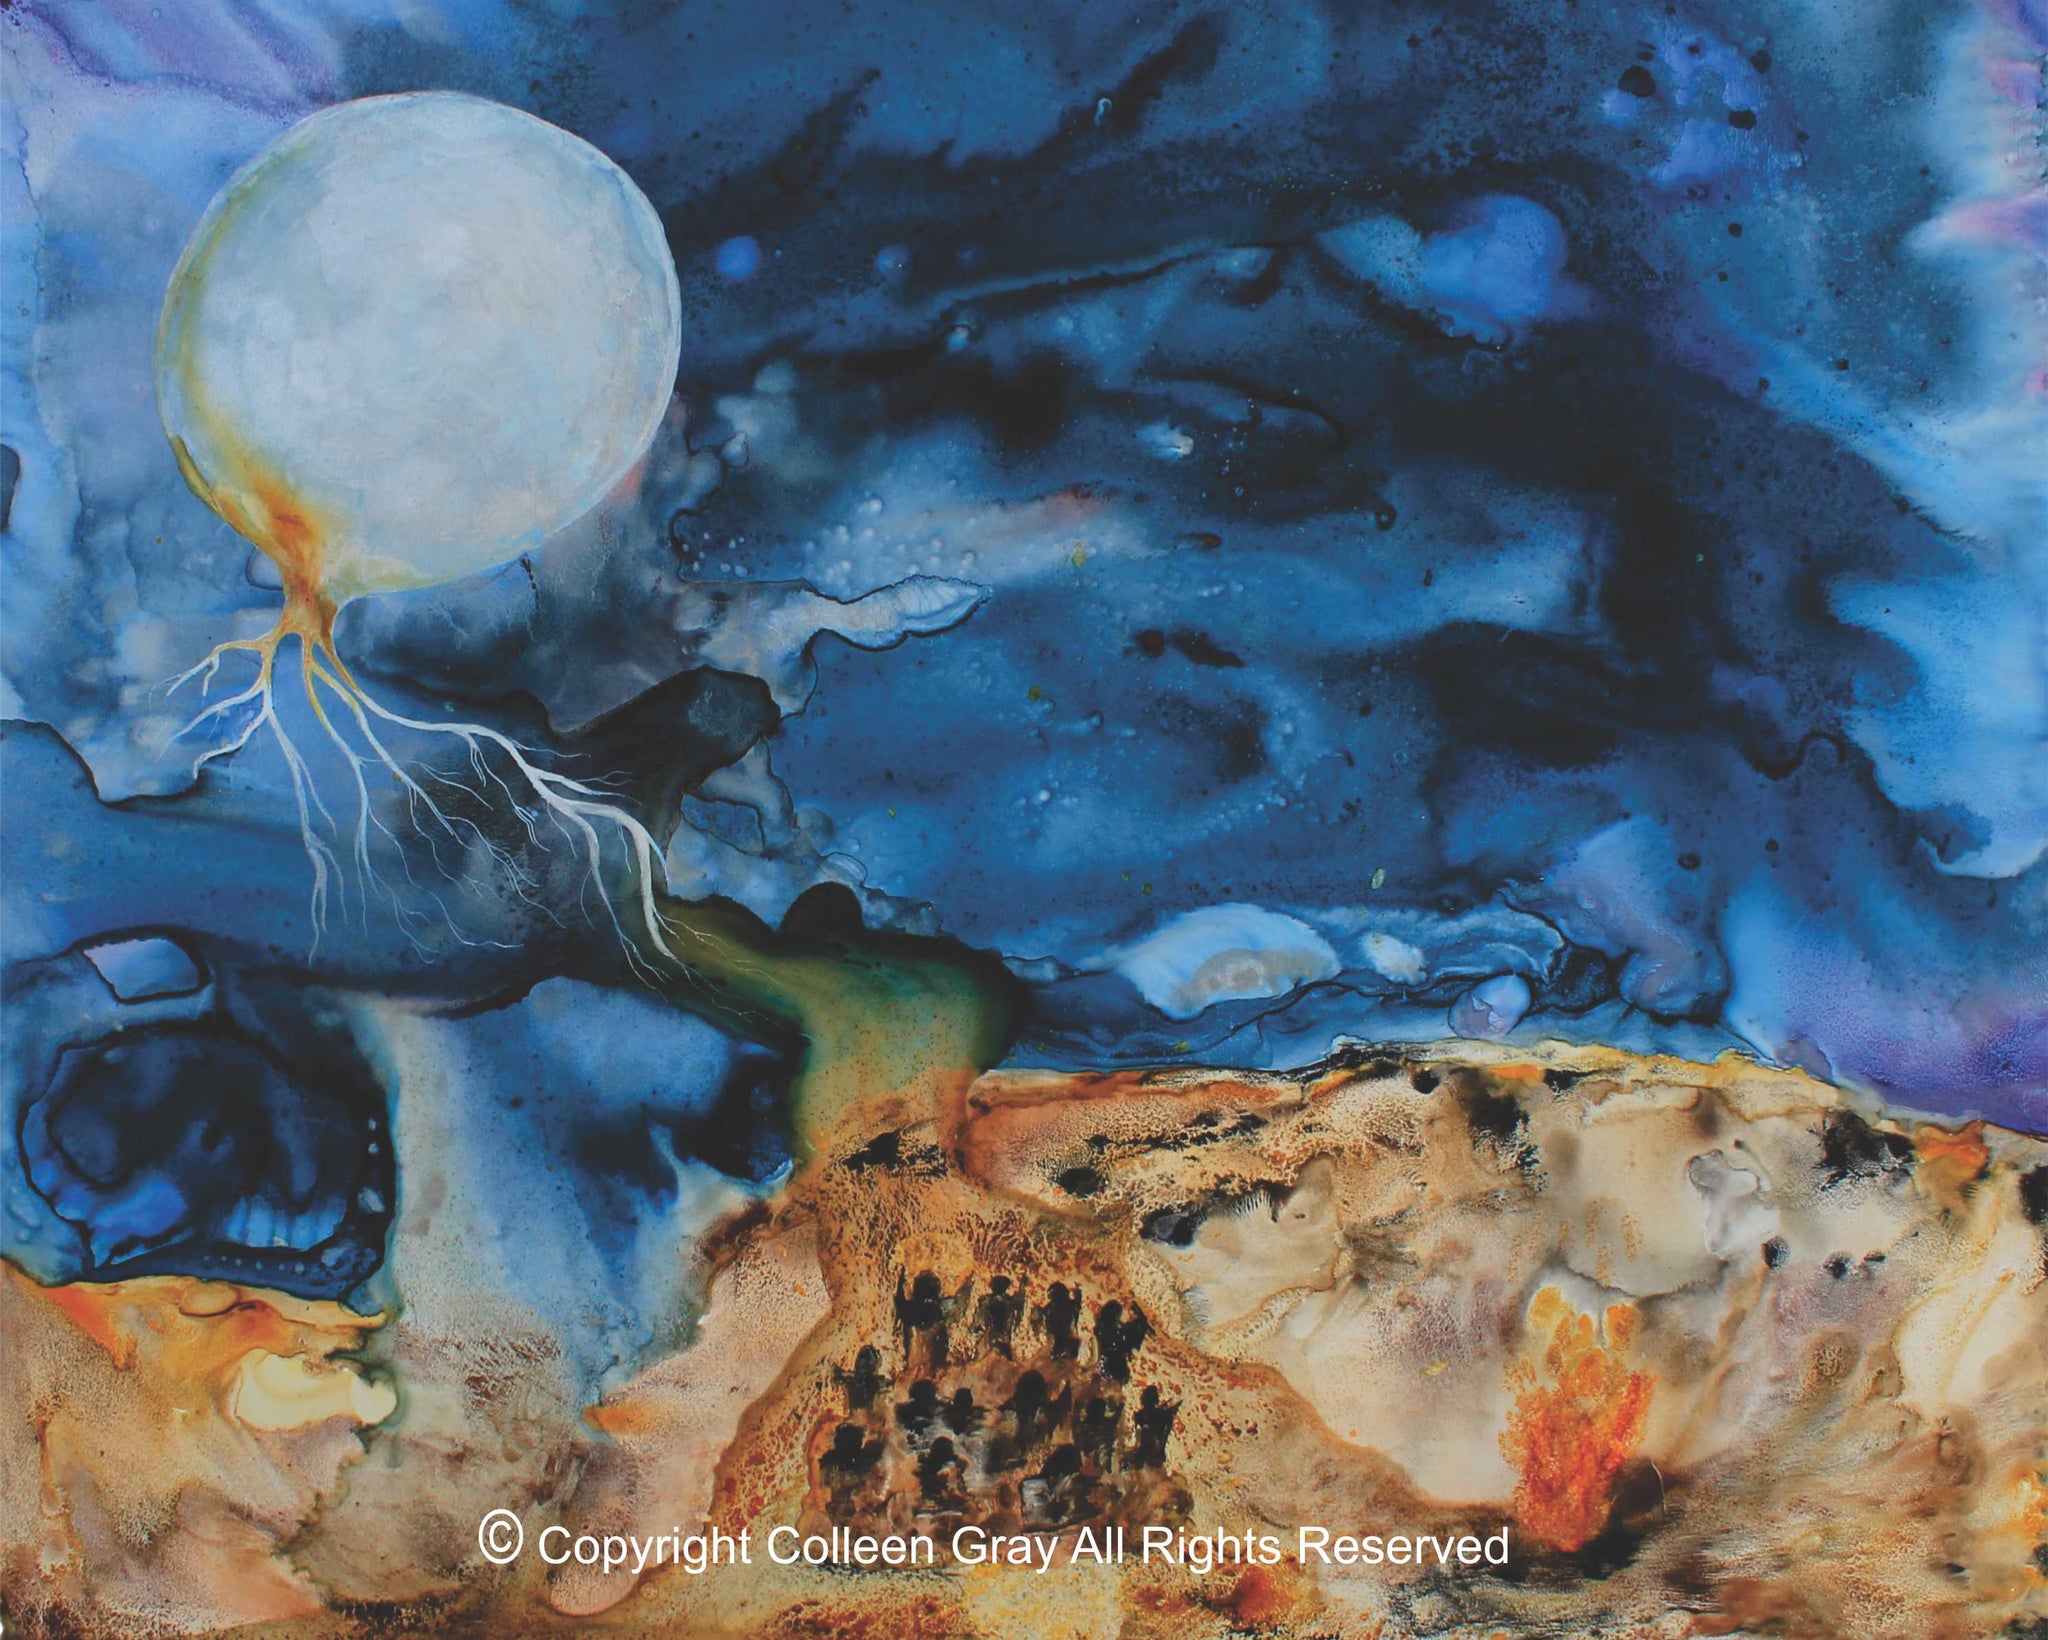 Image Title: Tatanka Wakan - 16x20 archival print by Metis Artist Colleen Gray Indigenous Canadian Art Work. Image of Full moon in vibrant blue sky with 13 grandmothers gathered below sturgeon moon. For sale at https://artforaidshop.ca